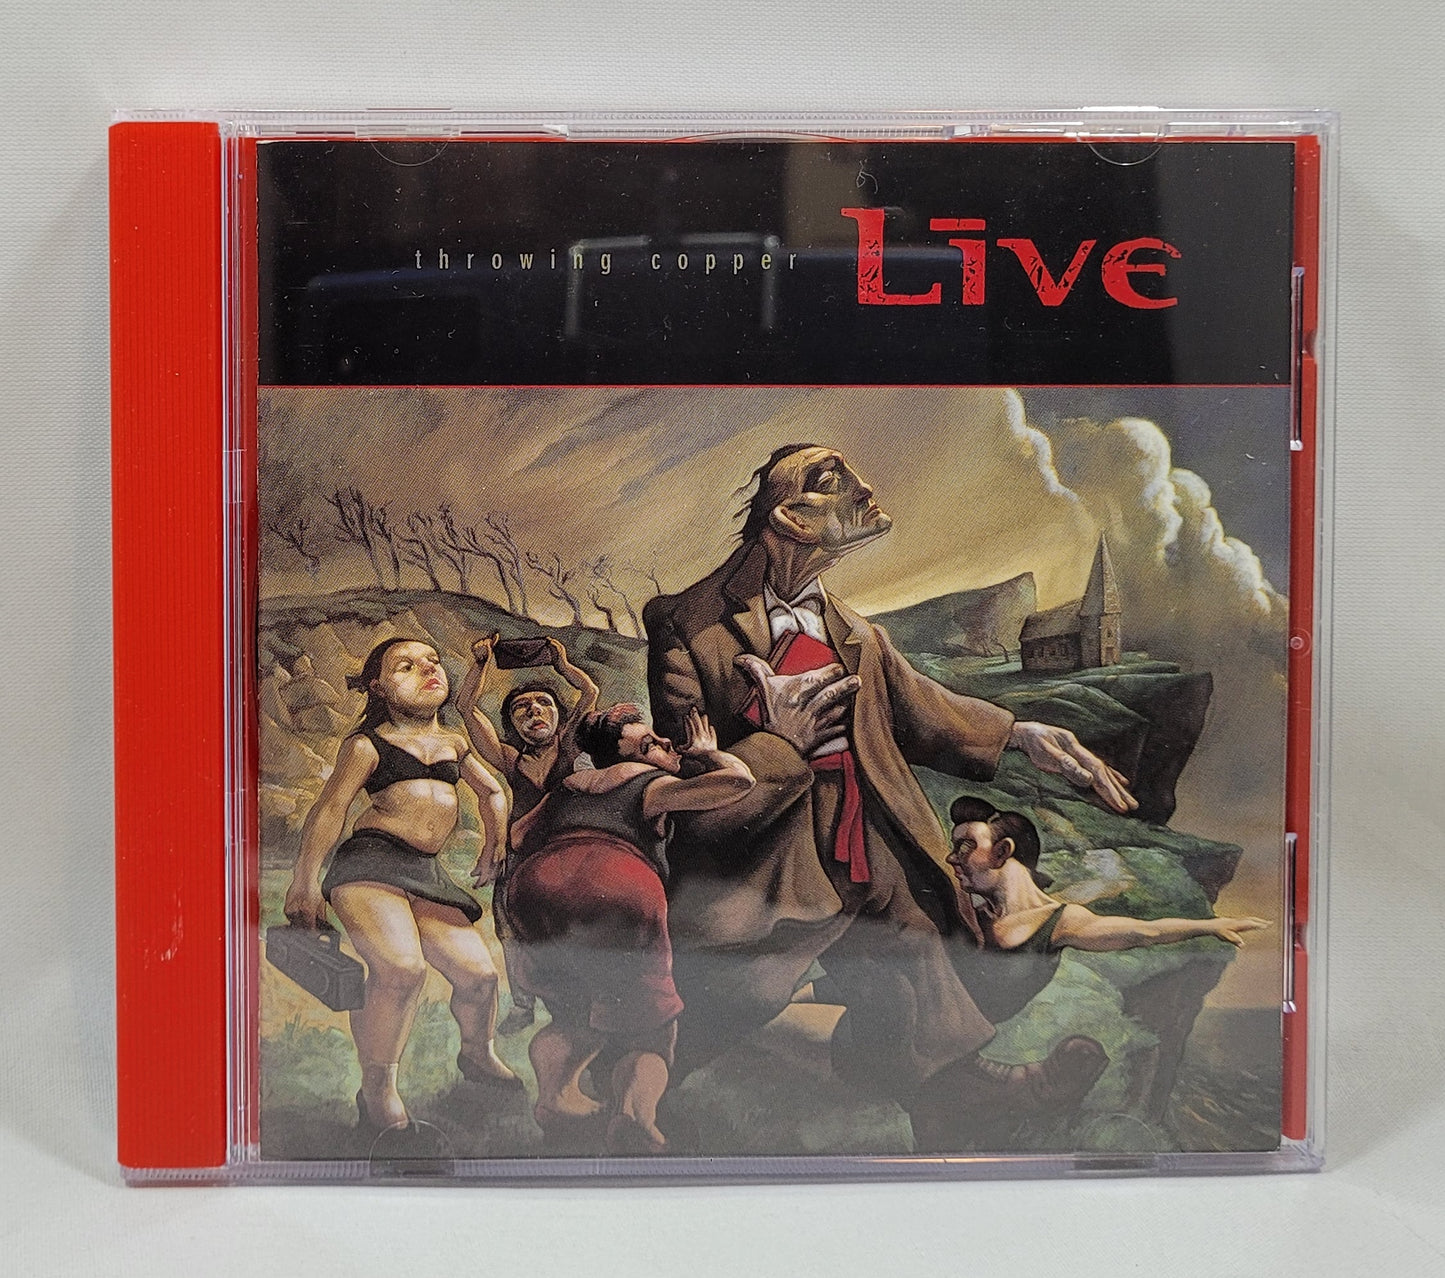 Live - Throwing Copper [CD] [B]